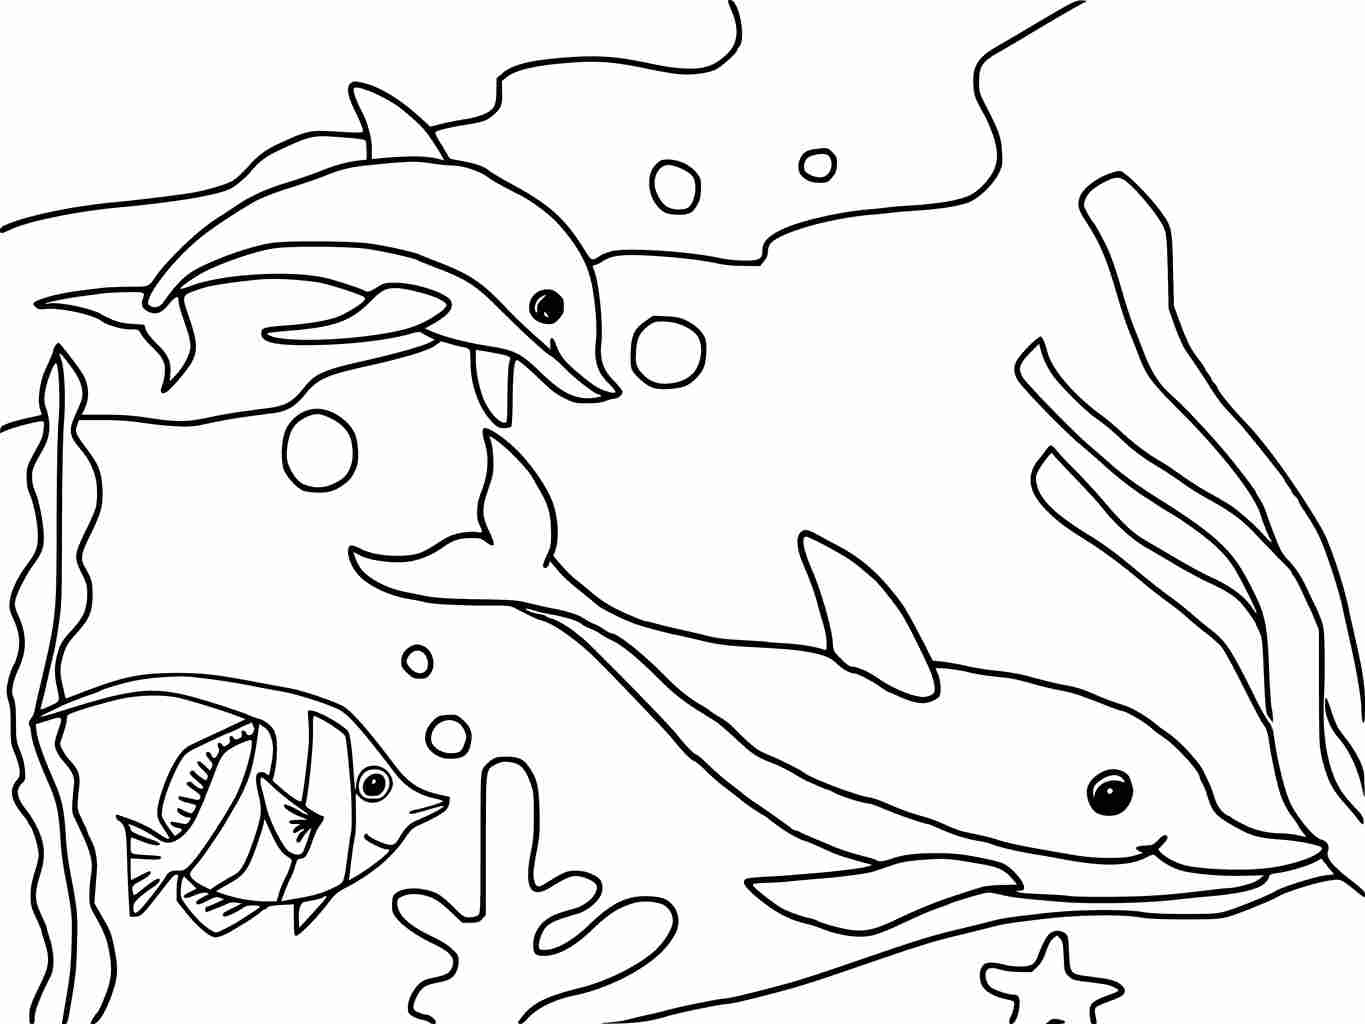 Dolphins swims under the sea Coloring Page